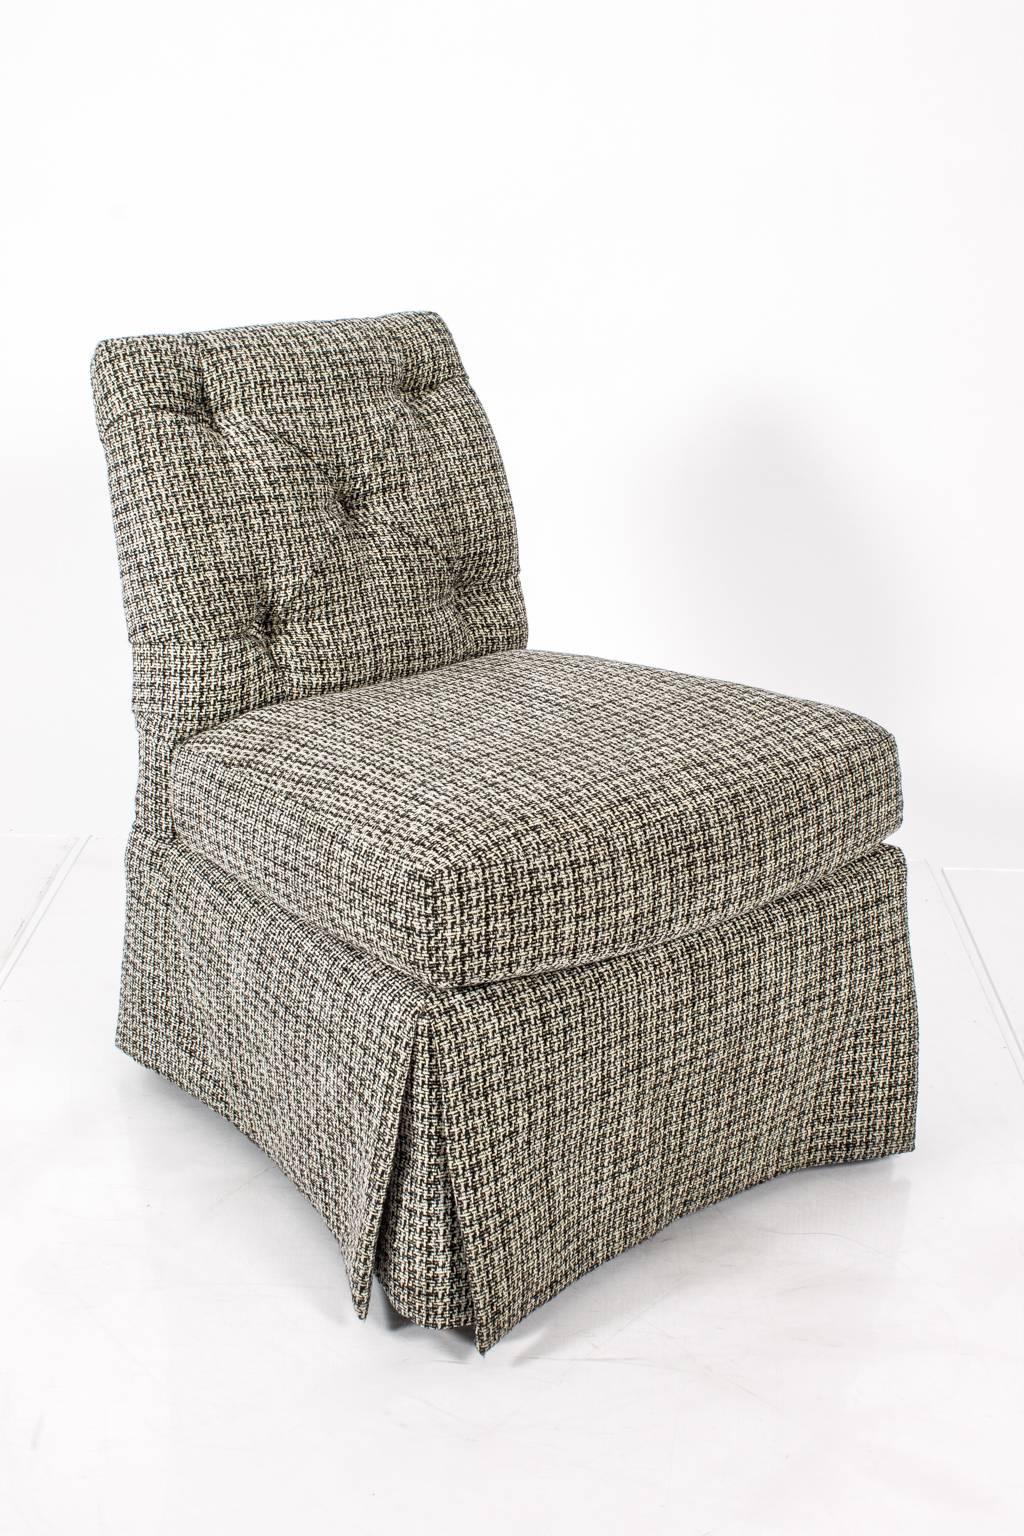 Baker slipper chair with tufted back and loose cushion. Black and white tweed upholstery.